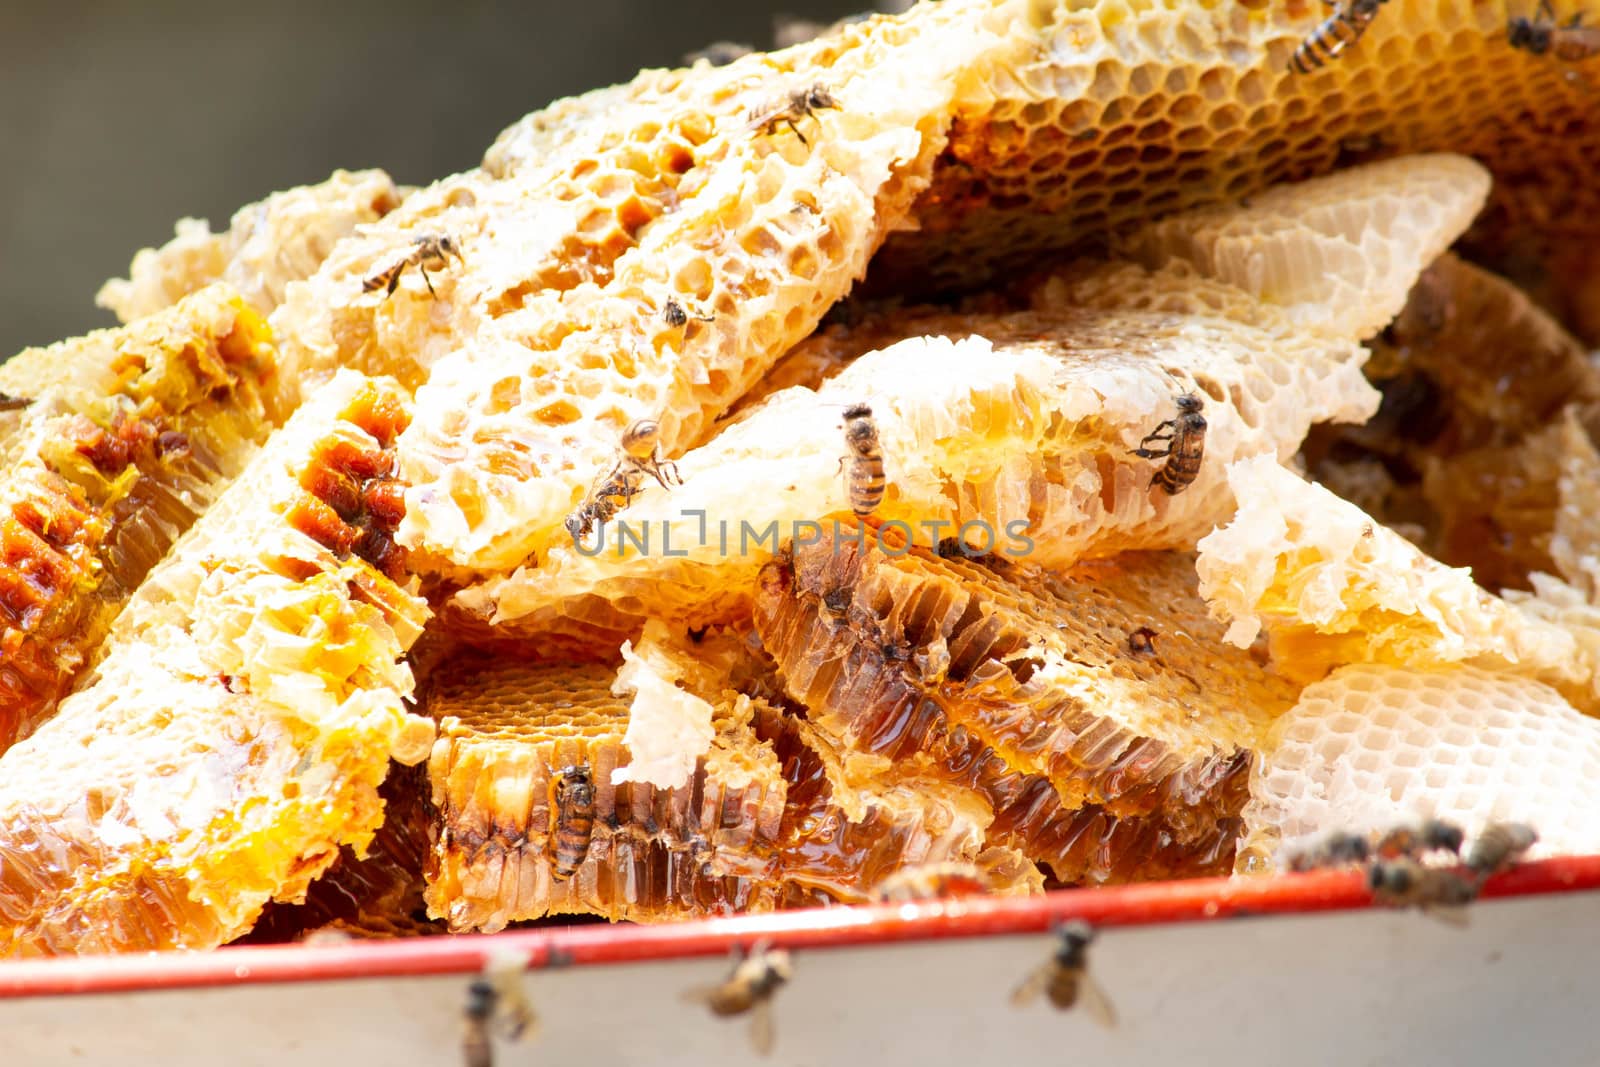 Honeycomb full of organic honey being collected in tray and prepare for pumping honey into the bottle. by TEERASAK